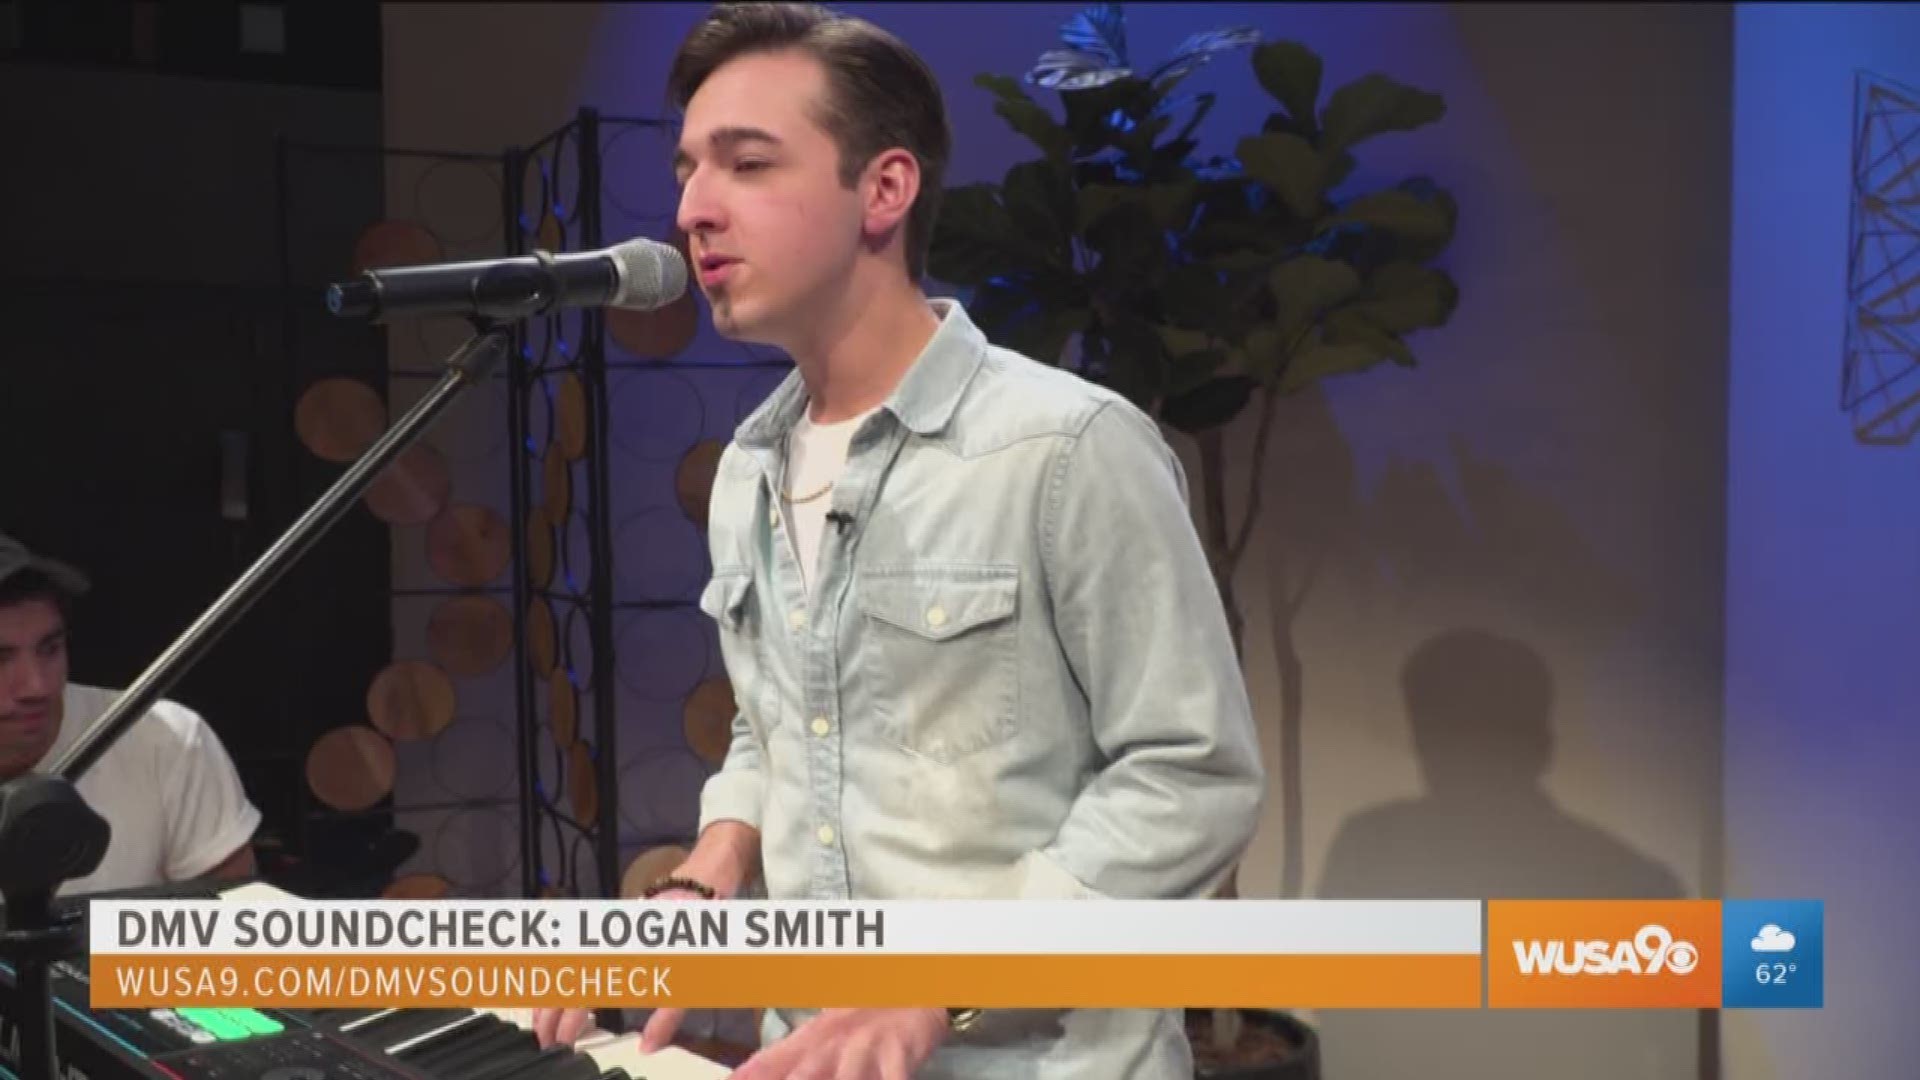 Florida native Logan Smith performs his original song "Pandora's Box" off of his soon to be released sophomore album.